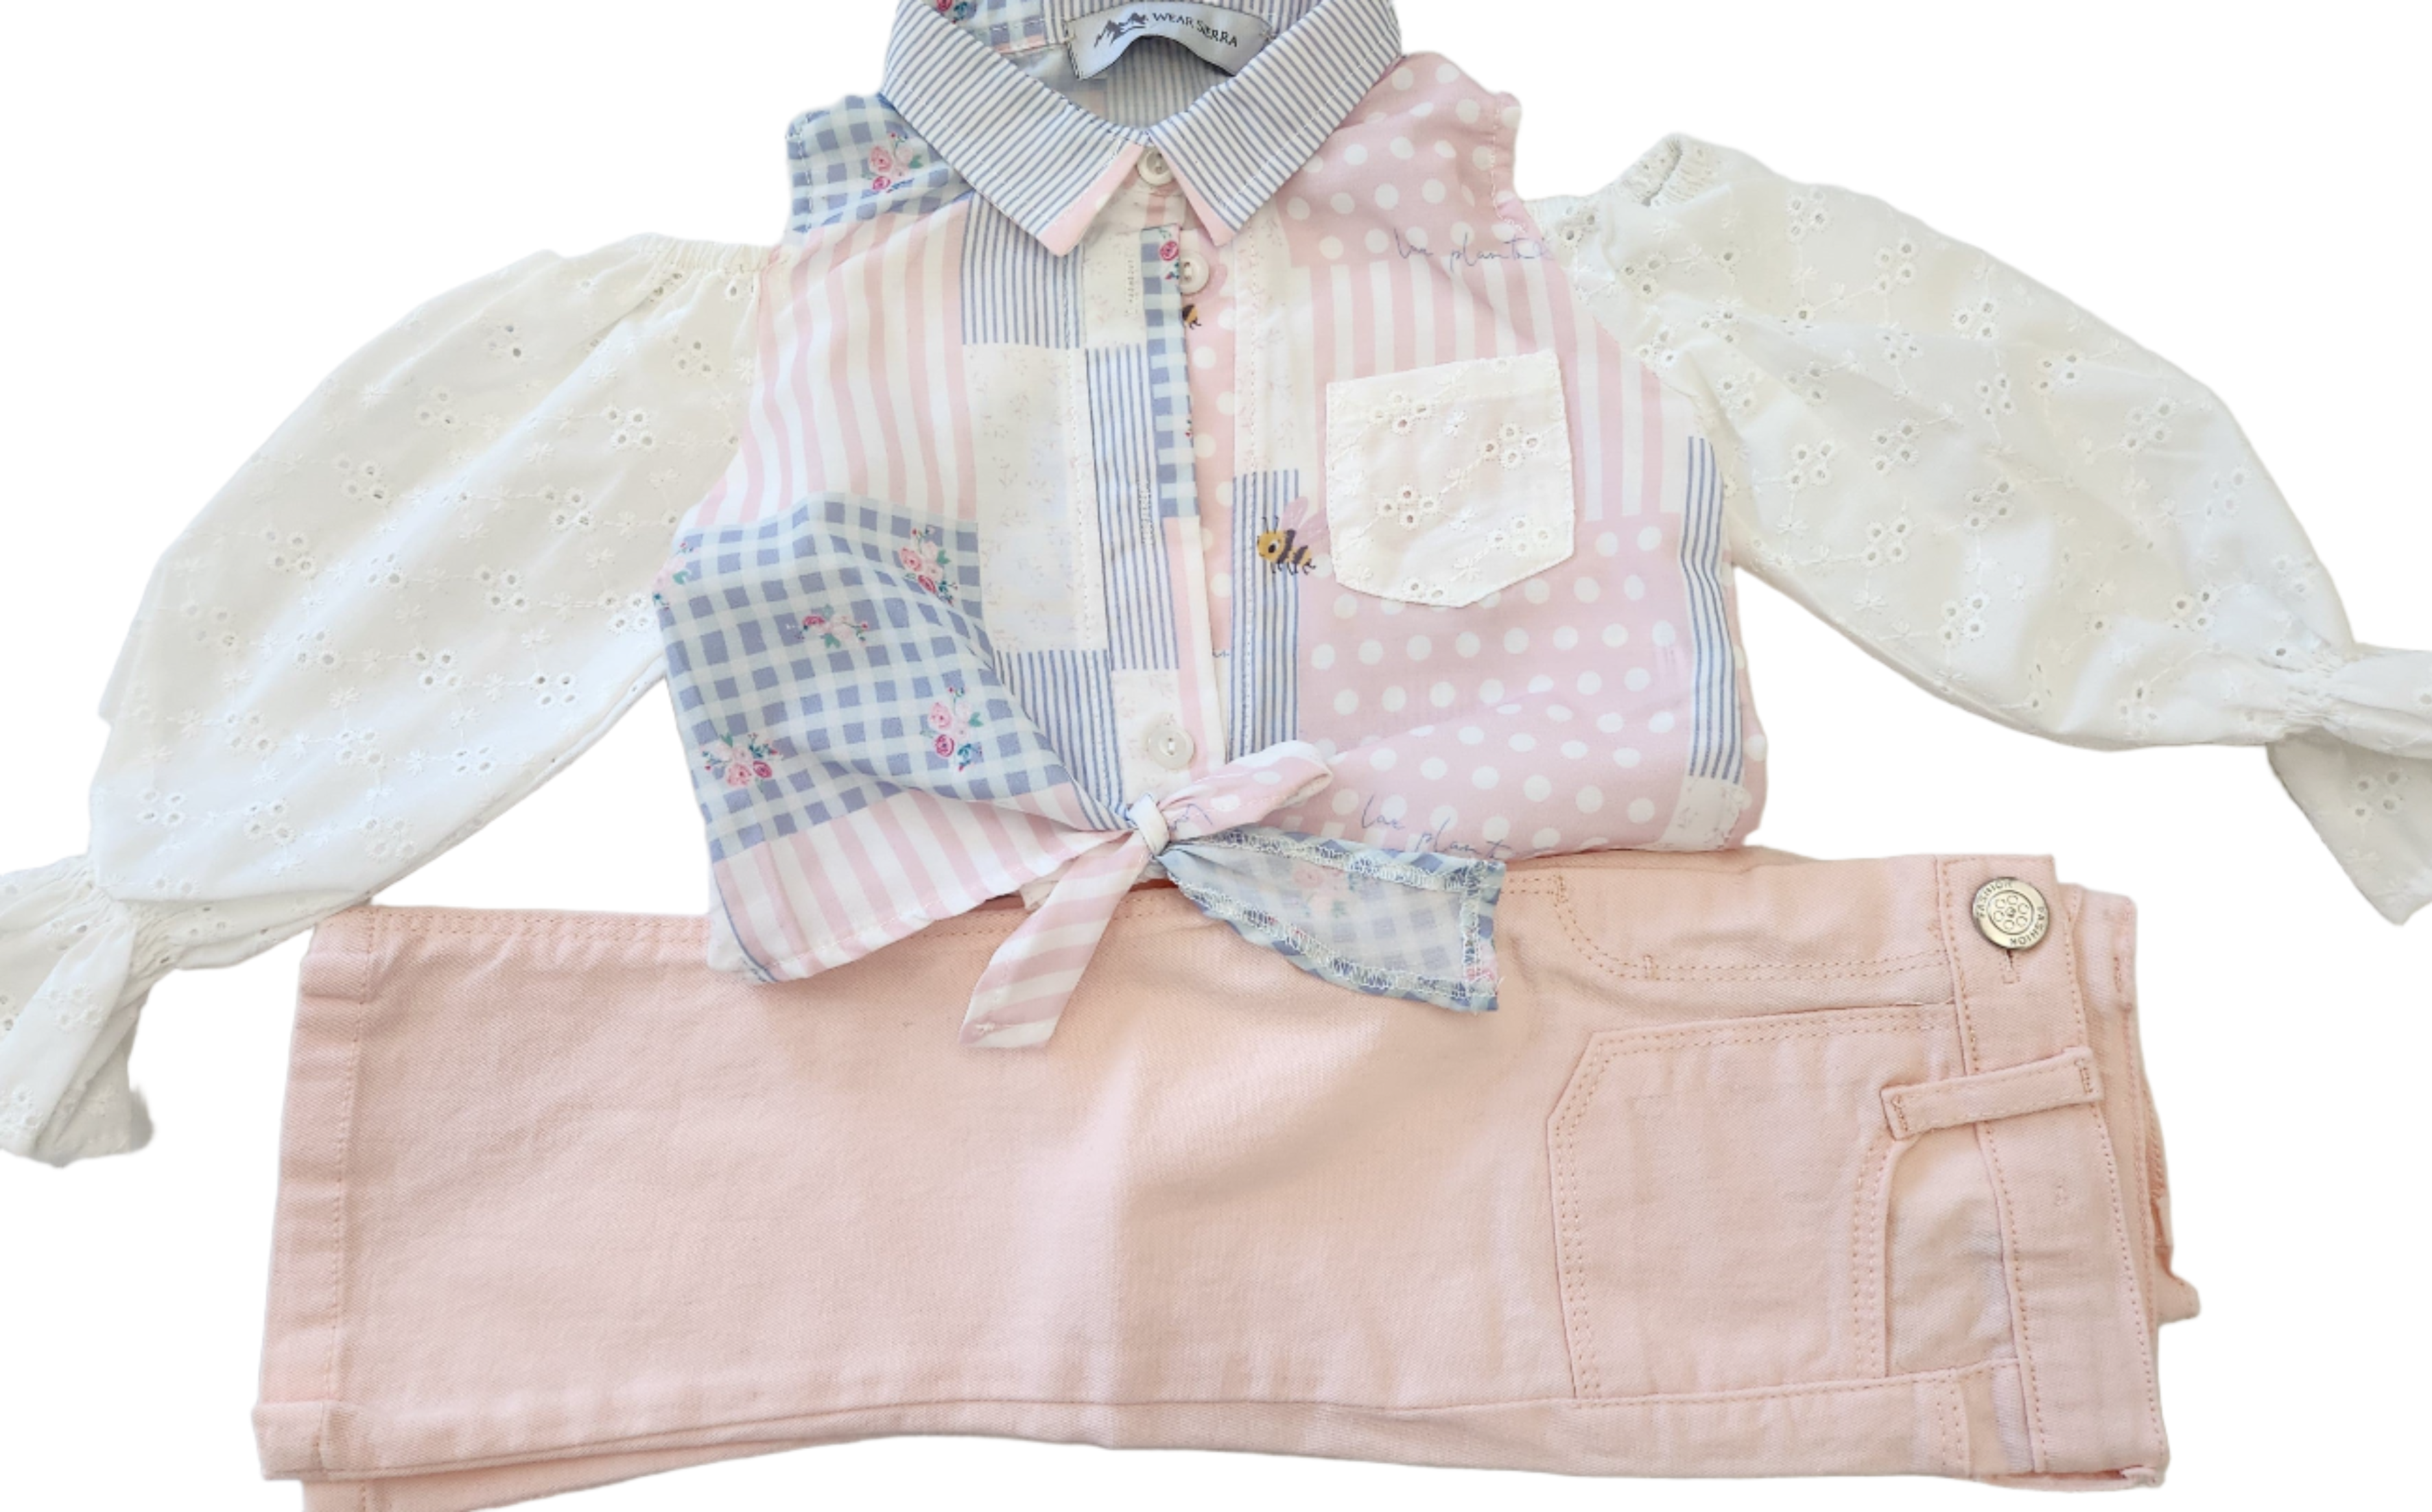 Infant and Toddler Girls' Shirt and Pants 2-Piece Outfit Great for Spring and Summer - 0